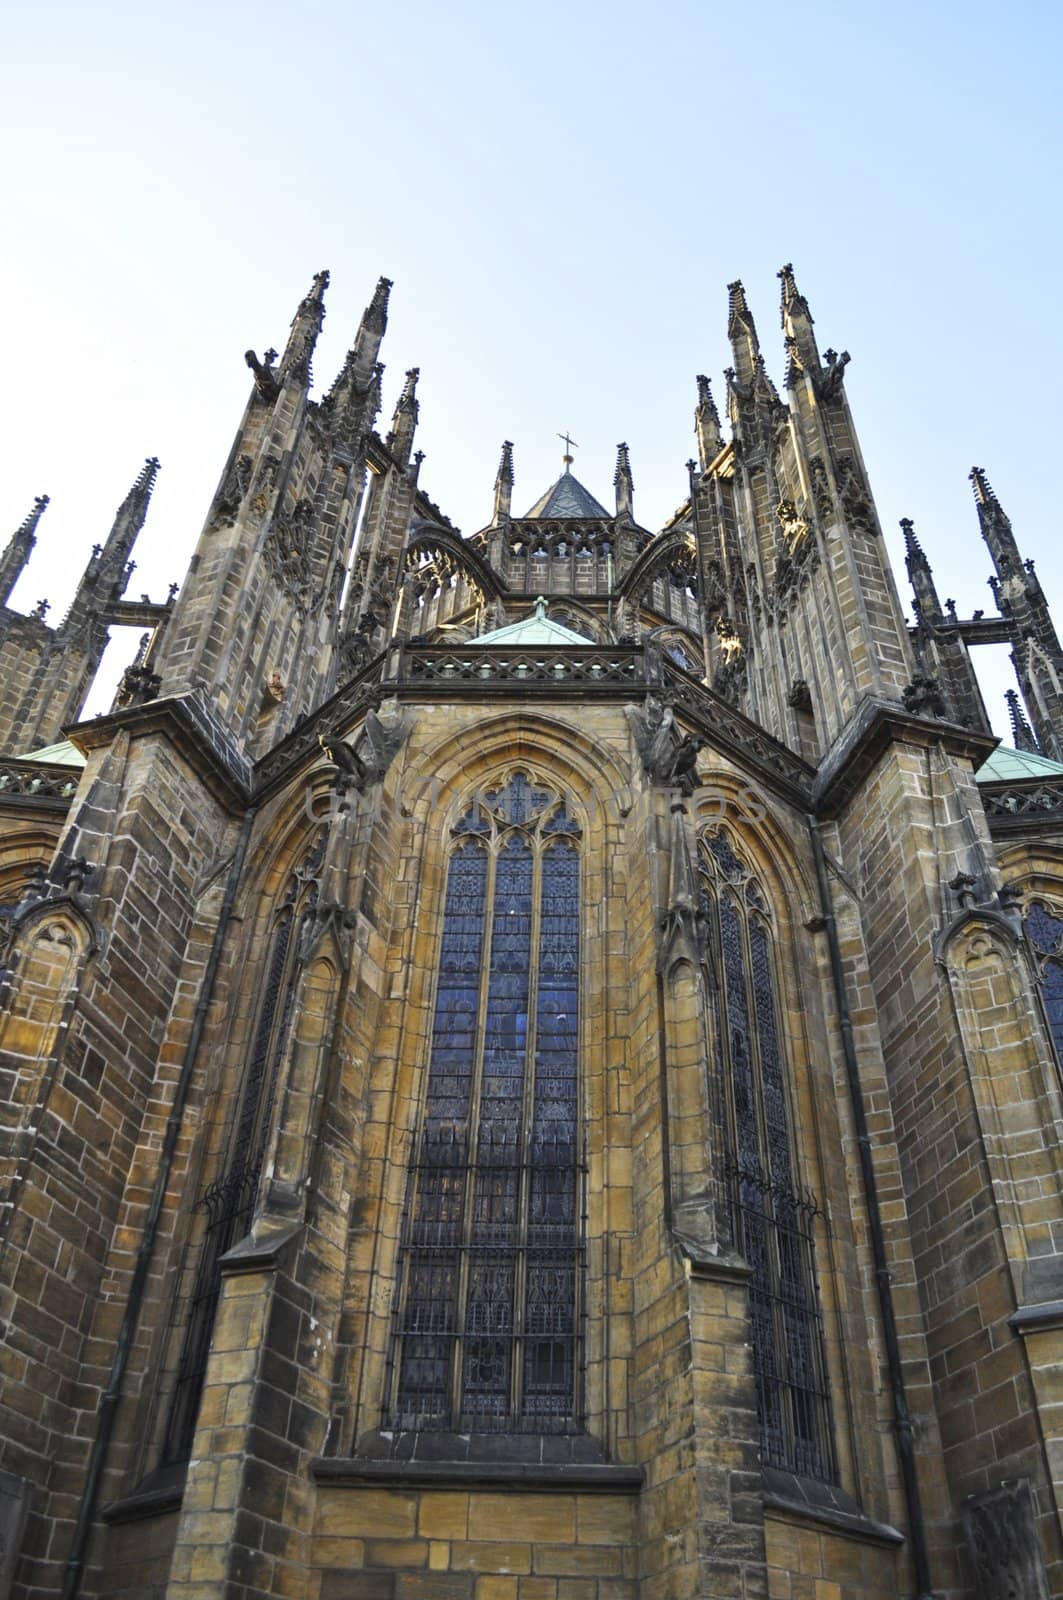 Saint Vitus' Cathedral  is as a Roman Catholic cathedral in Prague